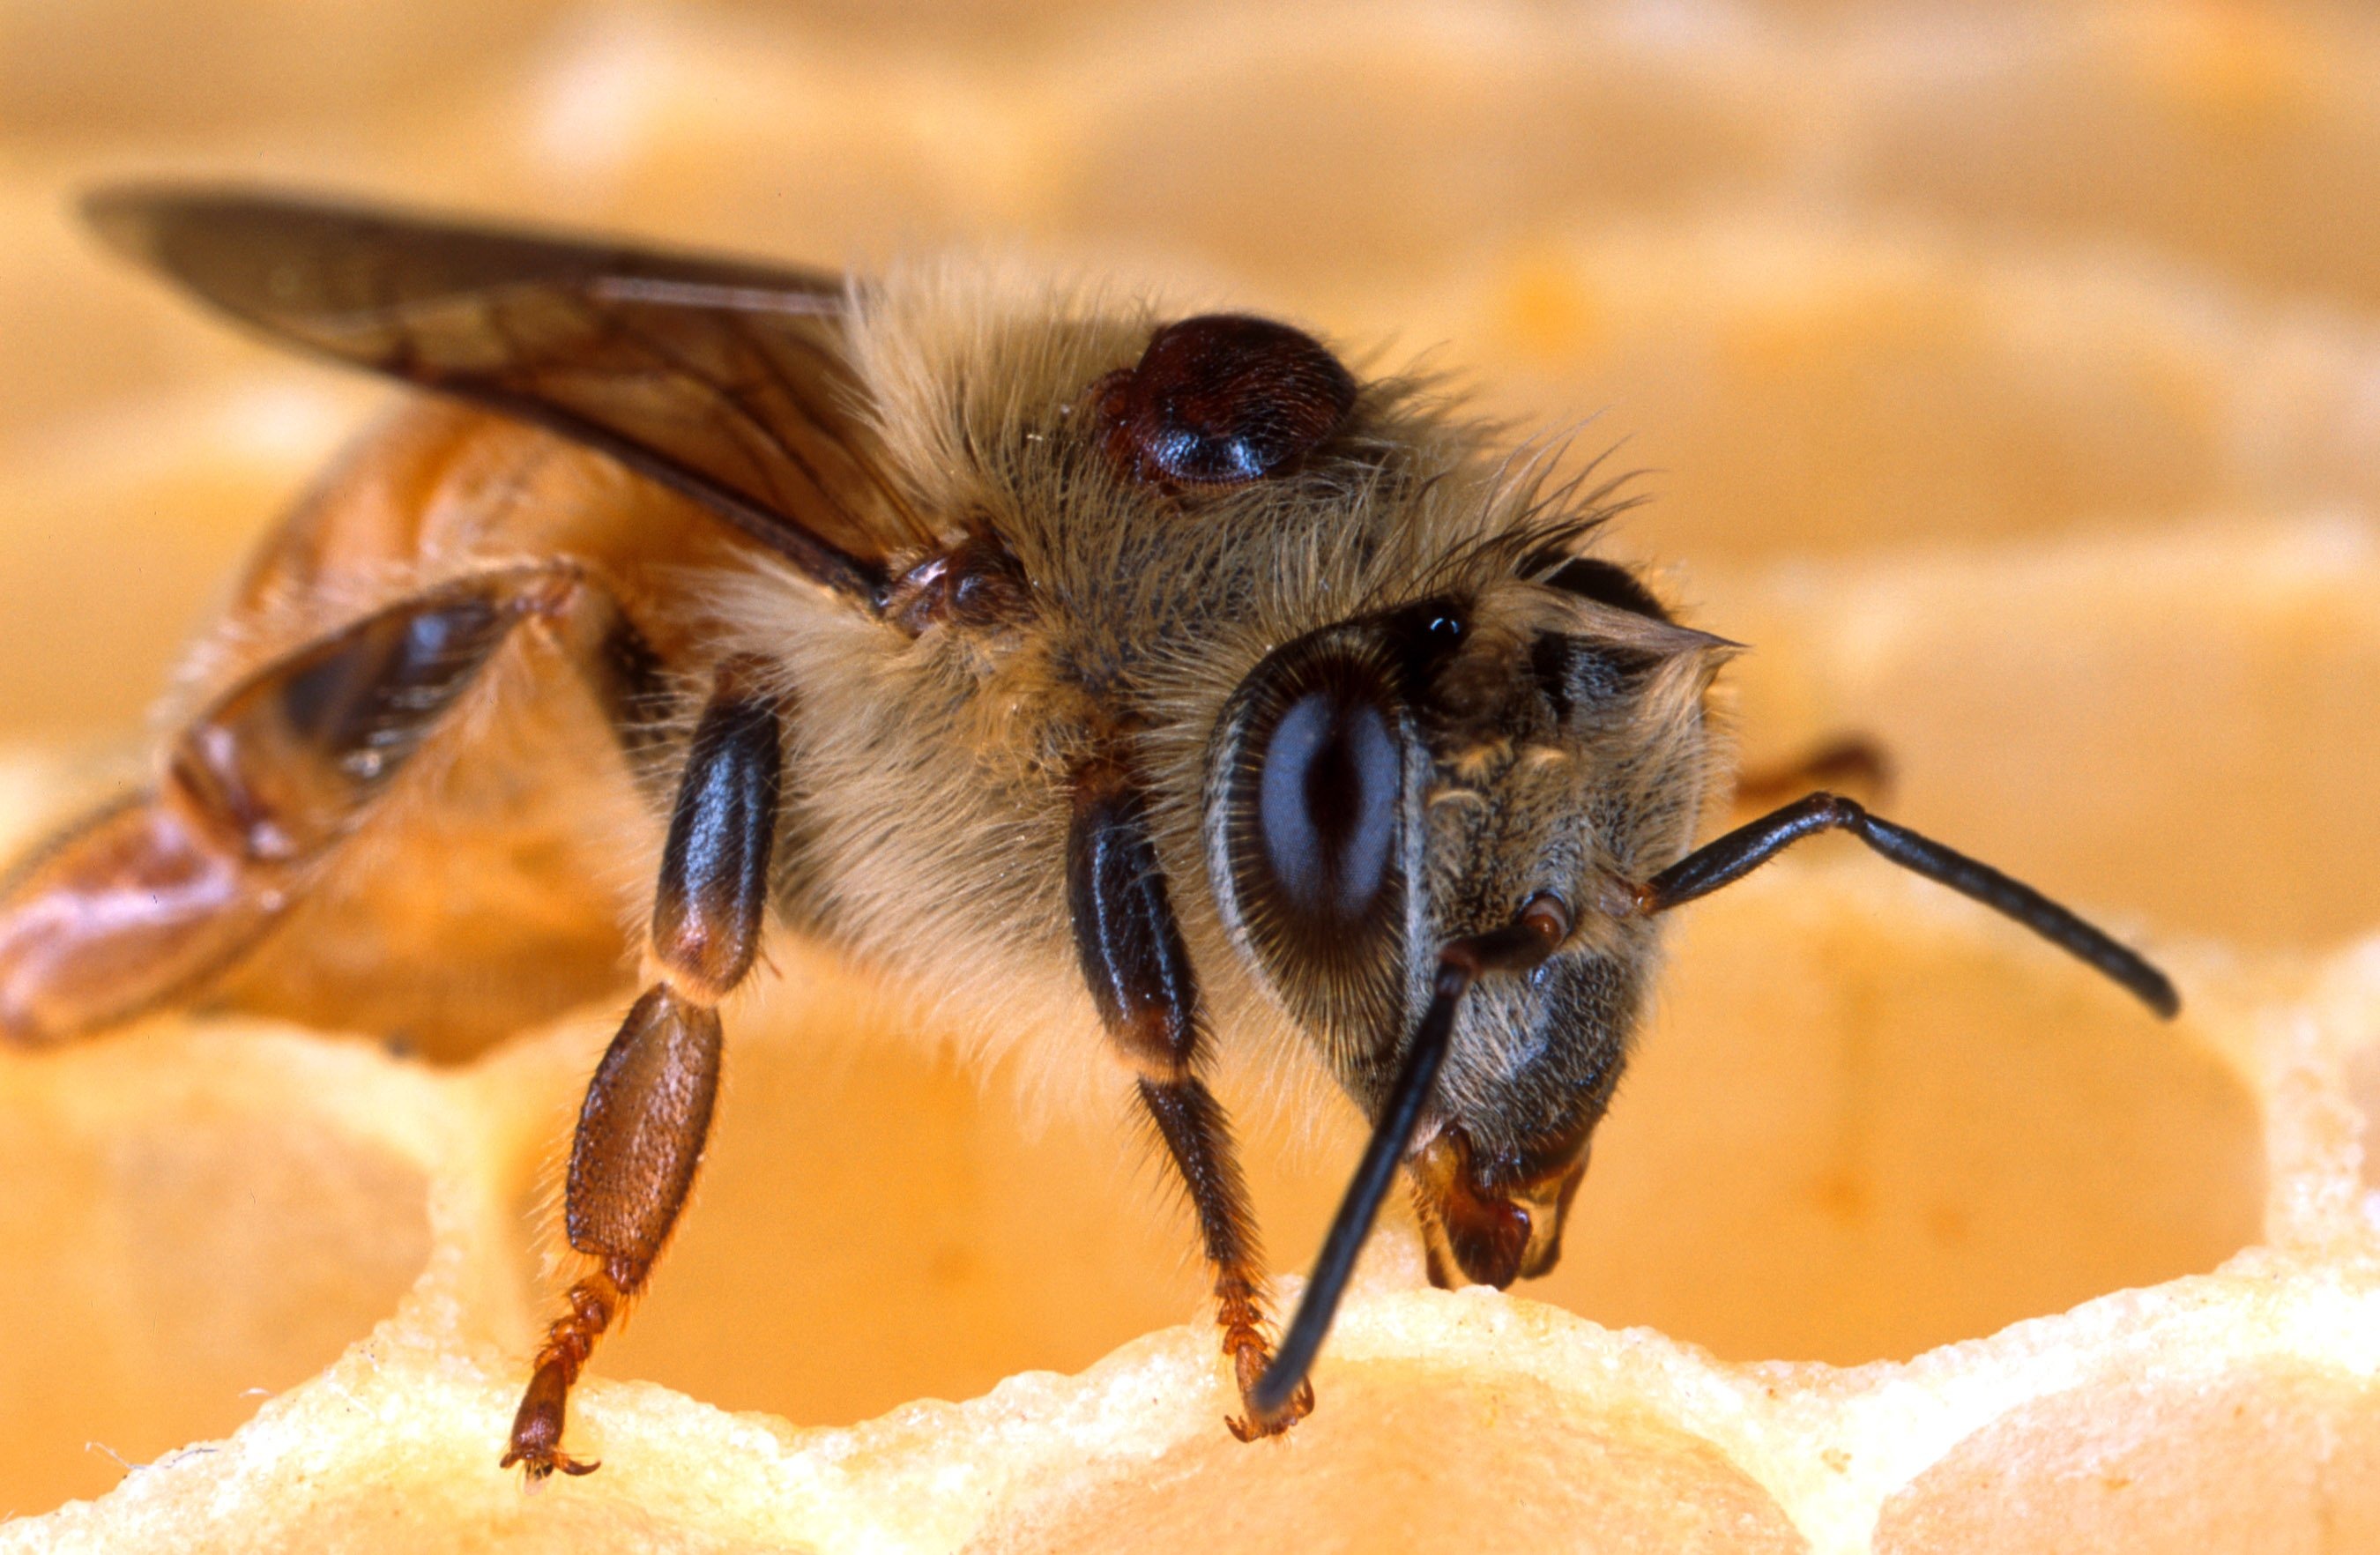 Western honey bee with a Varroa mite.